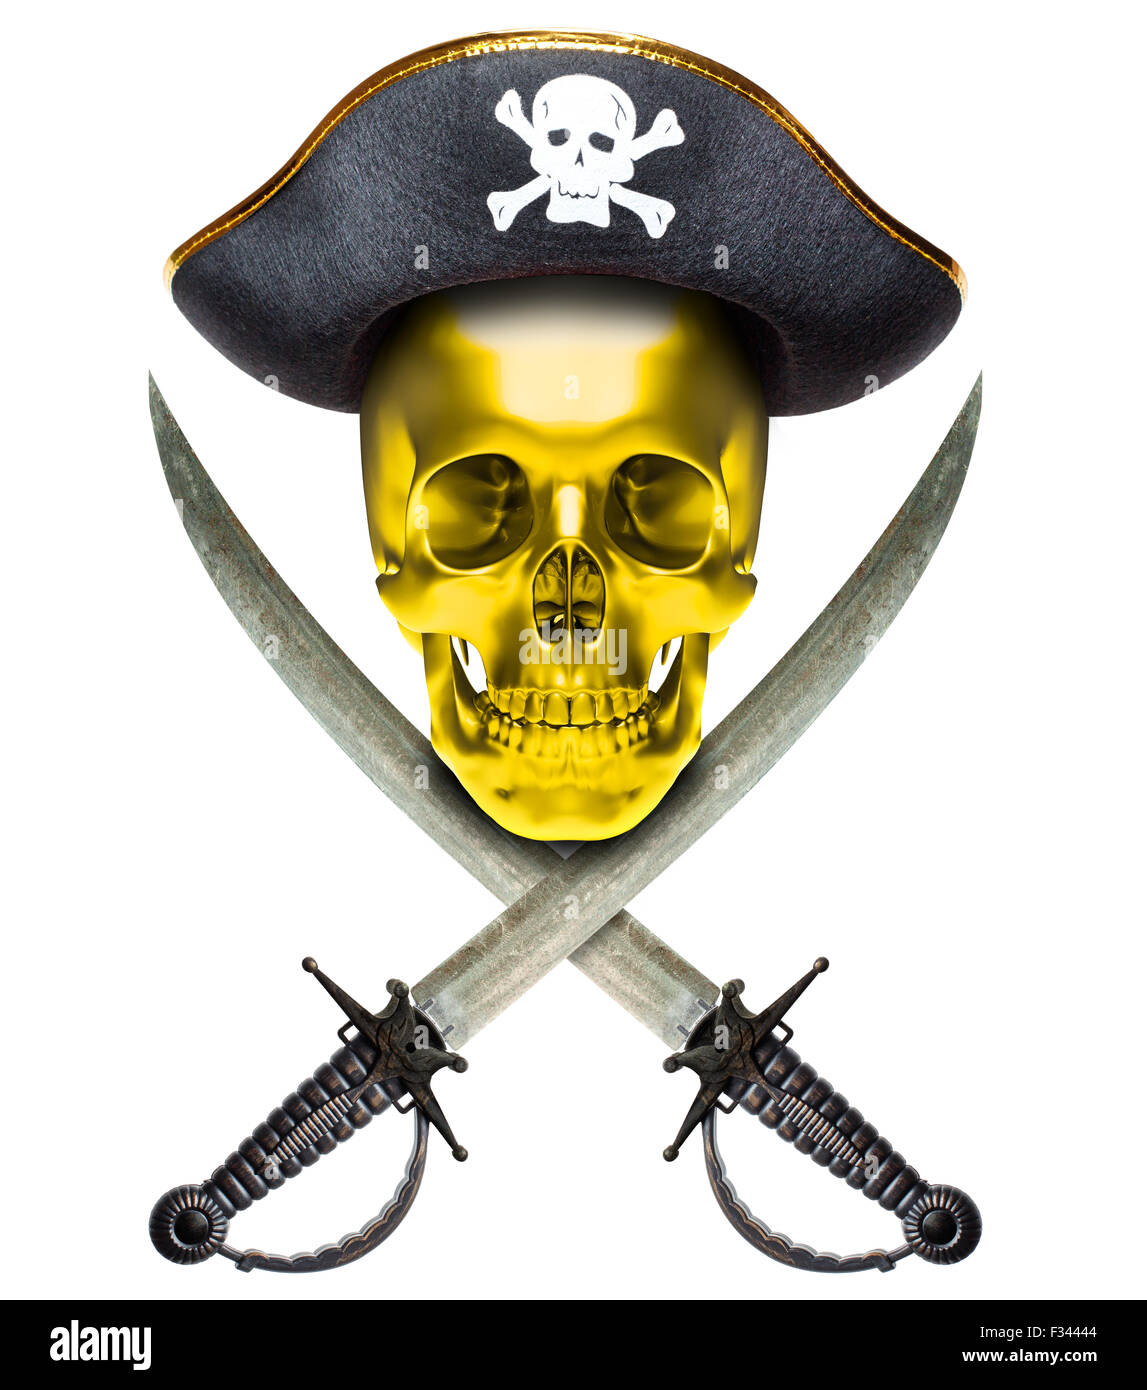 Jolly Roger in a cocked hat with sabers Stock Photo